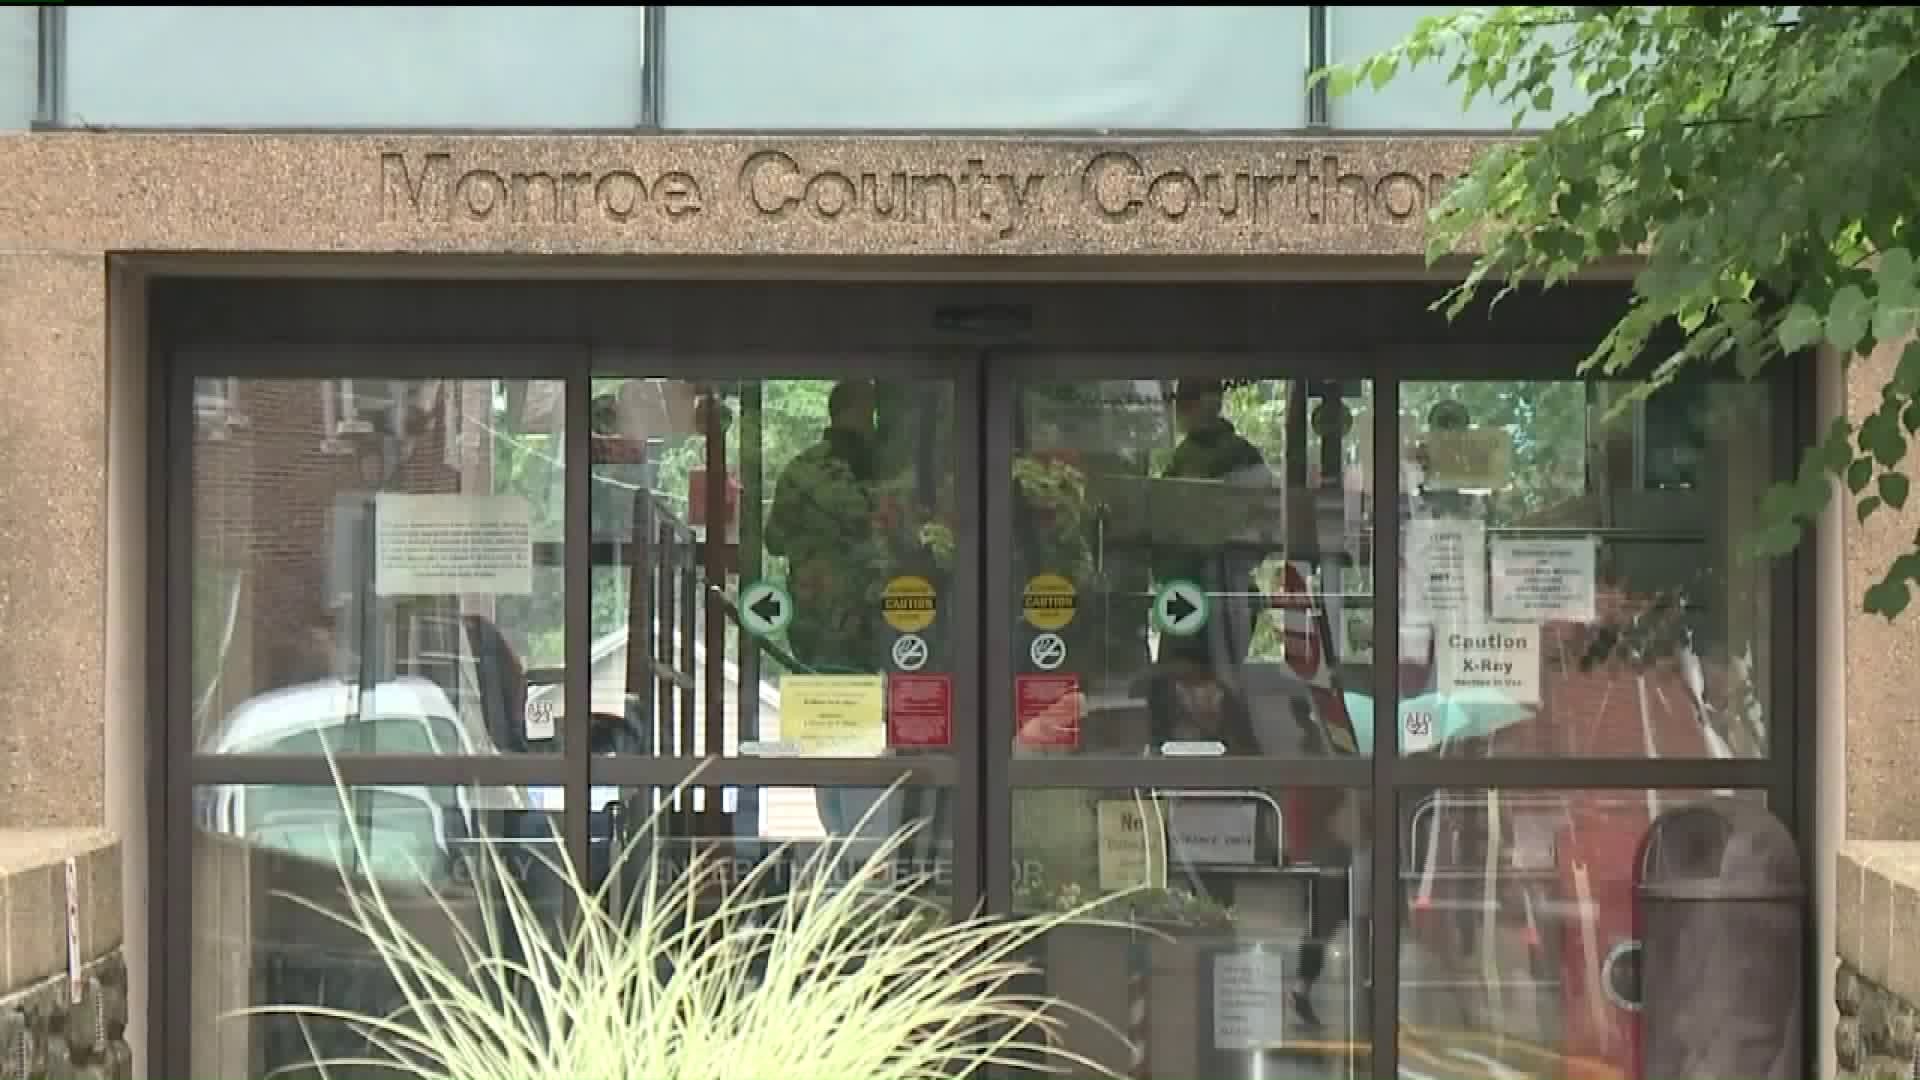 Bomb Threat Forced Evacuation at Monroe County Courthouse